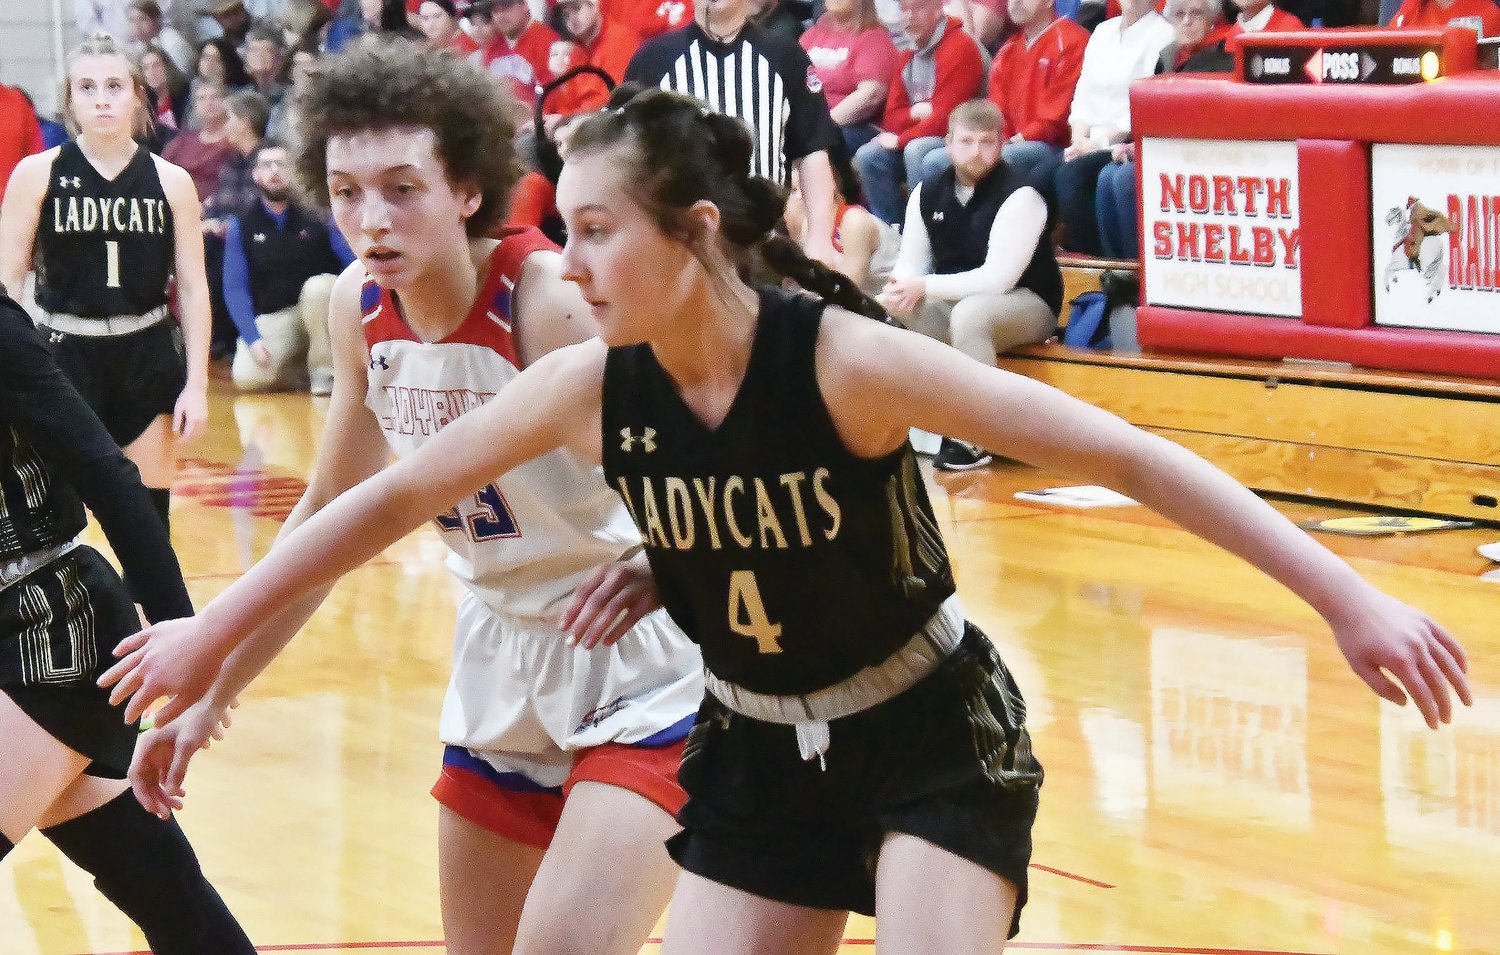 Cairo High School's Kennedy Kearns (4) attempts to box out South Shelby's Mille Mozee-Williams during Saturday's North Shelby Tournament girls' basketball championship game.